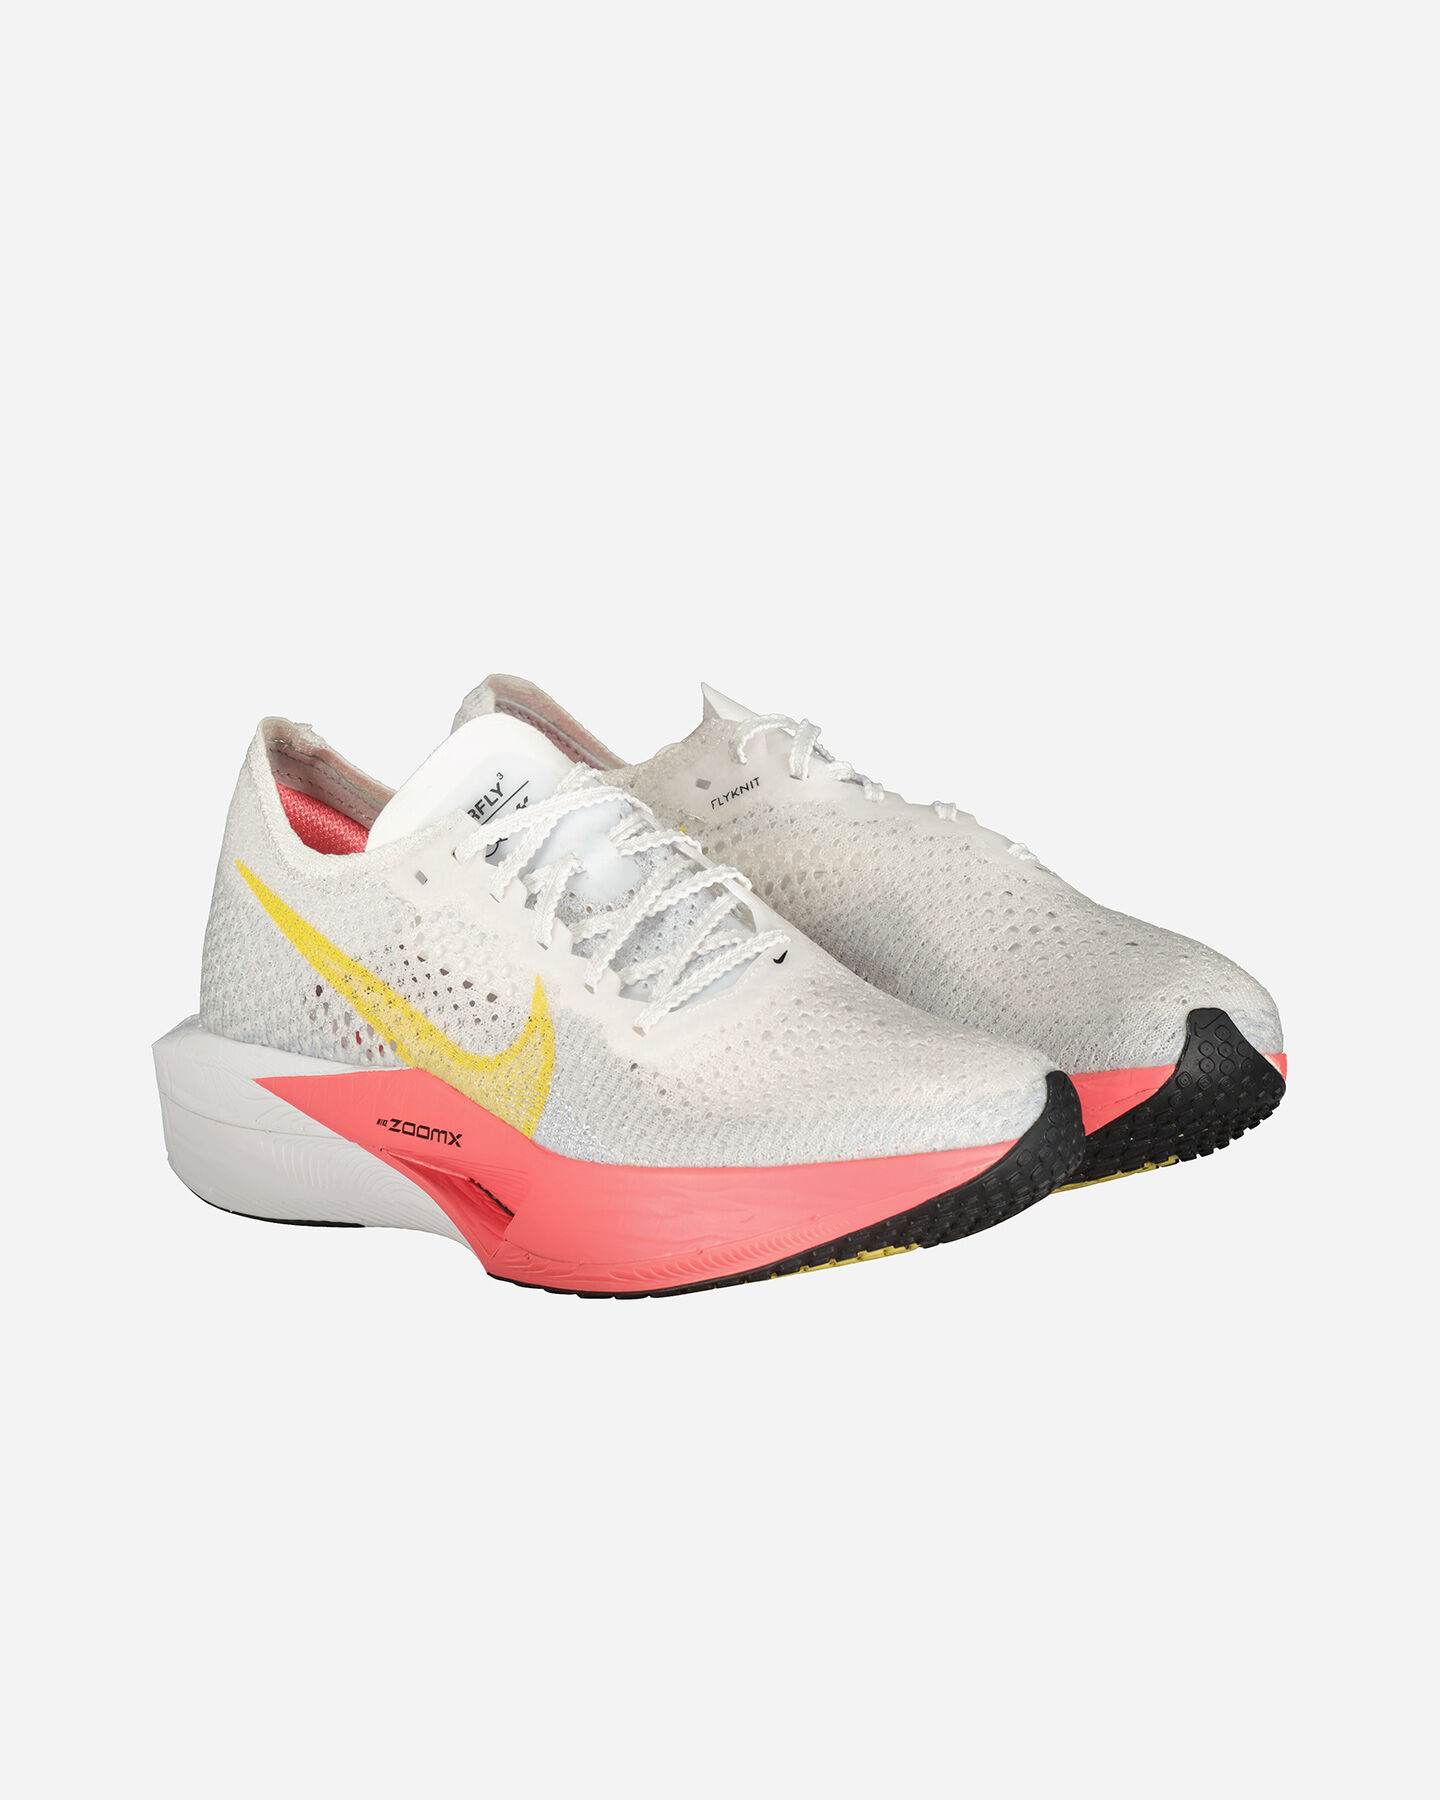  Scarpe running NIKE ZOOMX VAPORFLY NEXT% 3 W S5563002|101|5 scatto 1